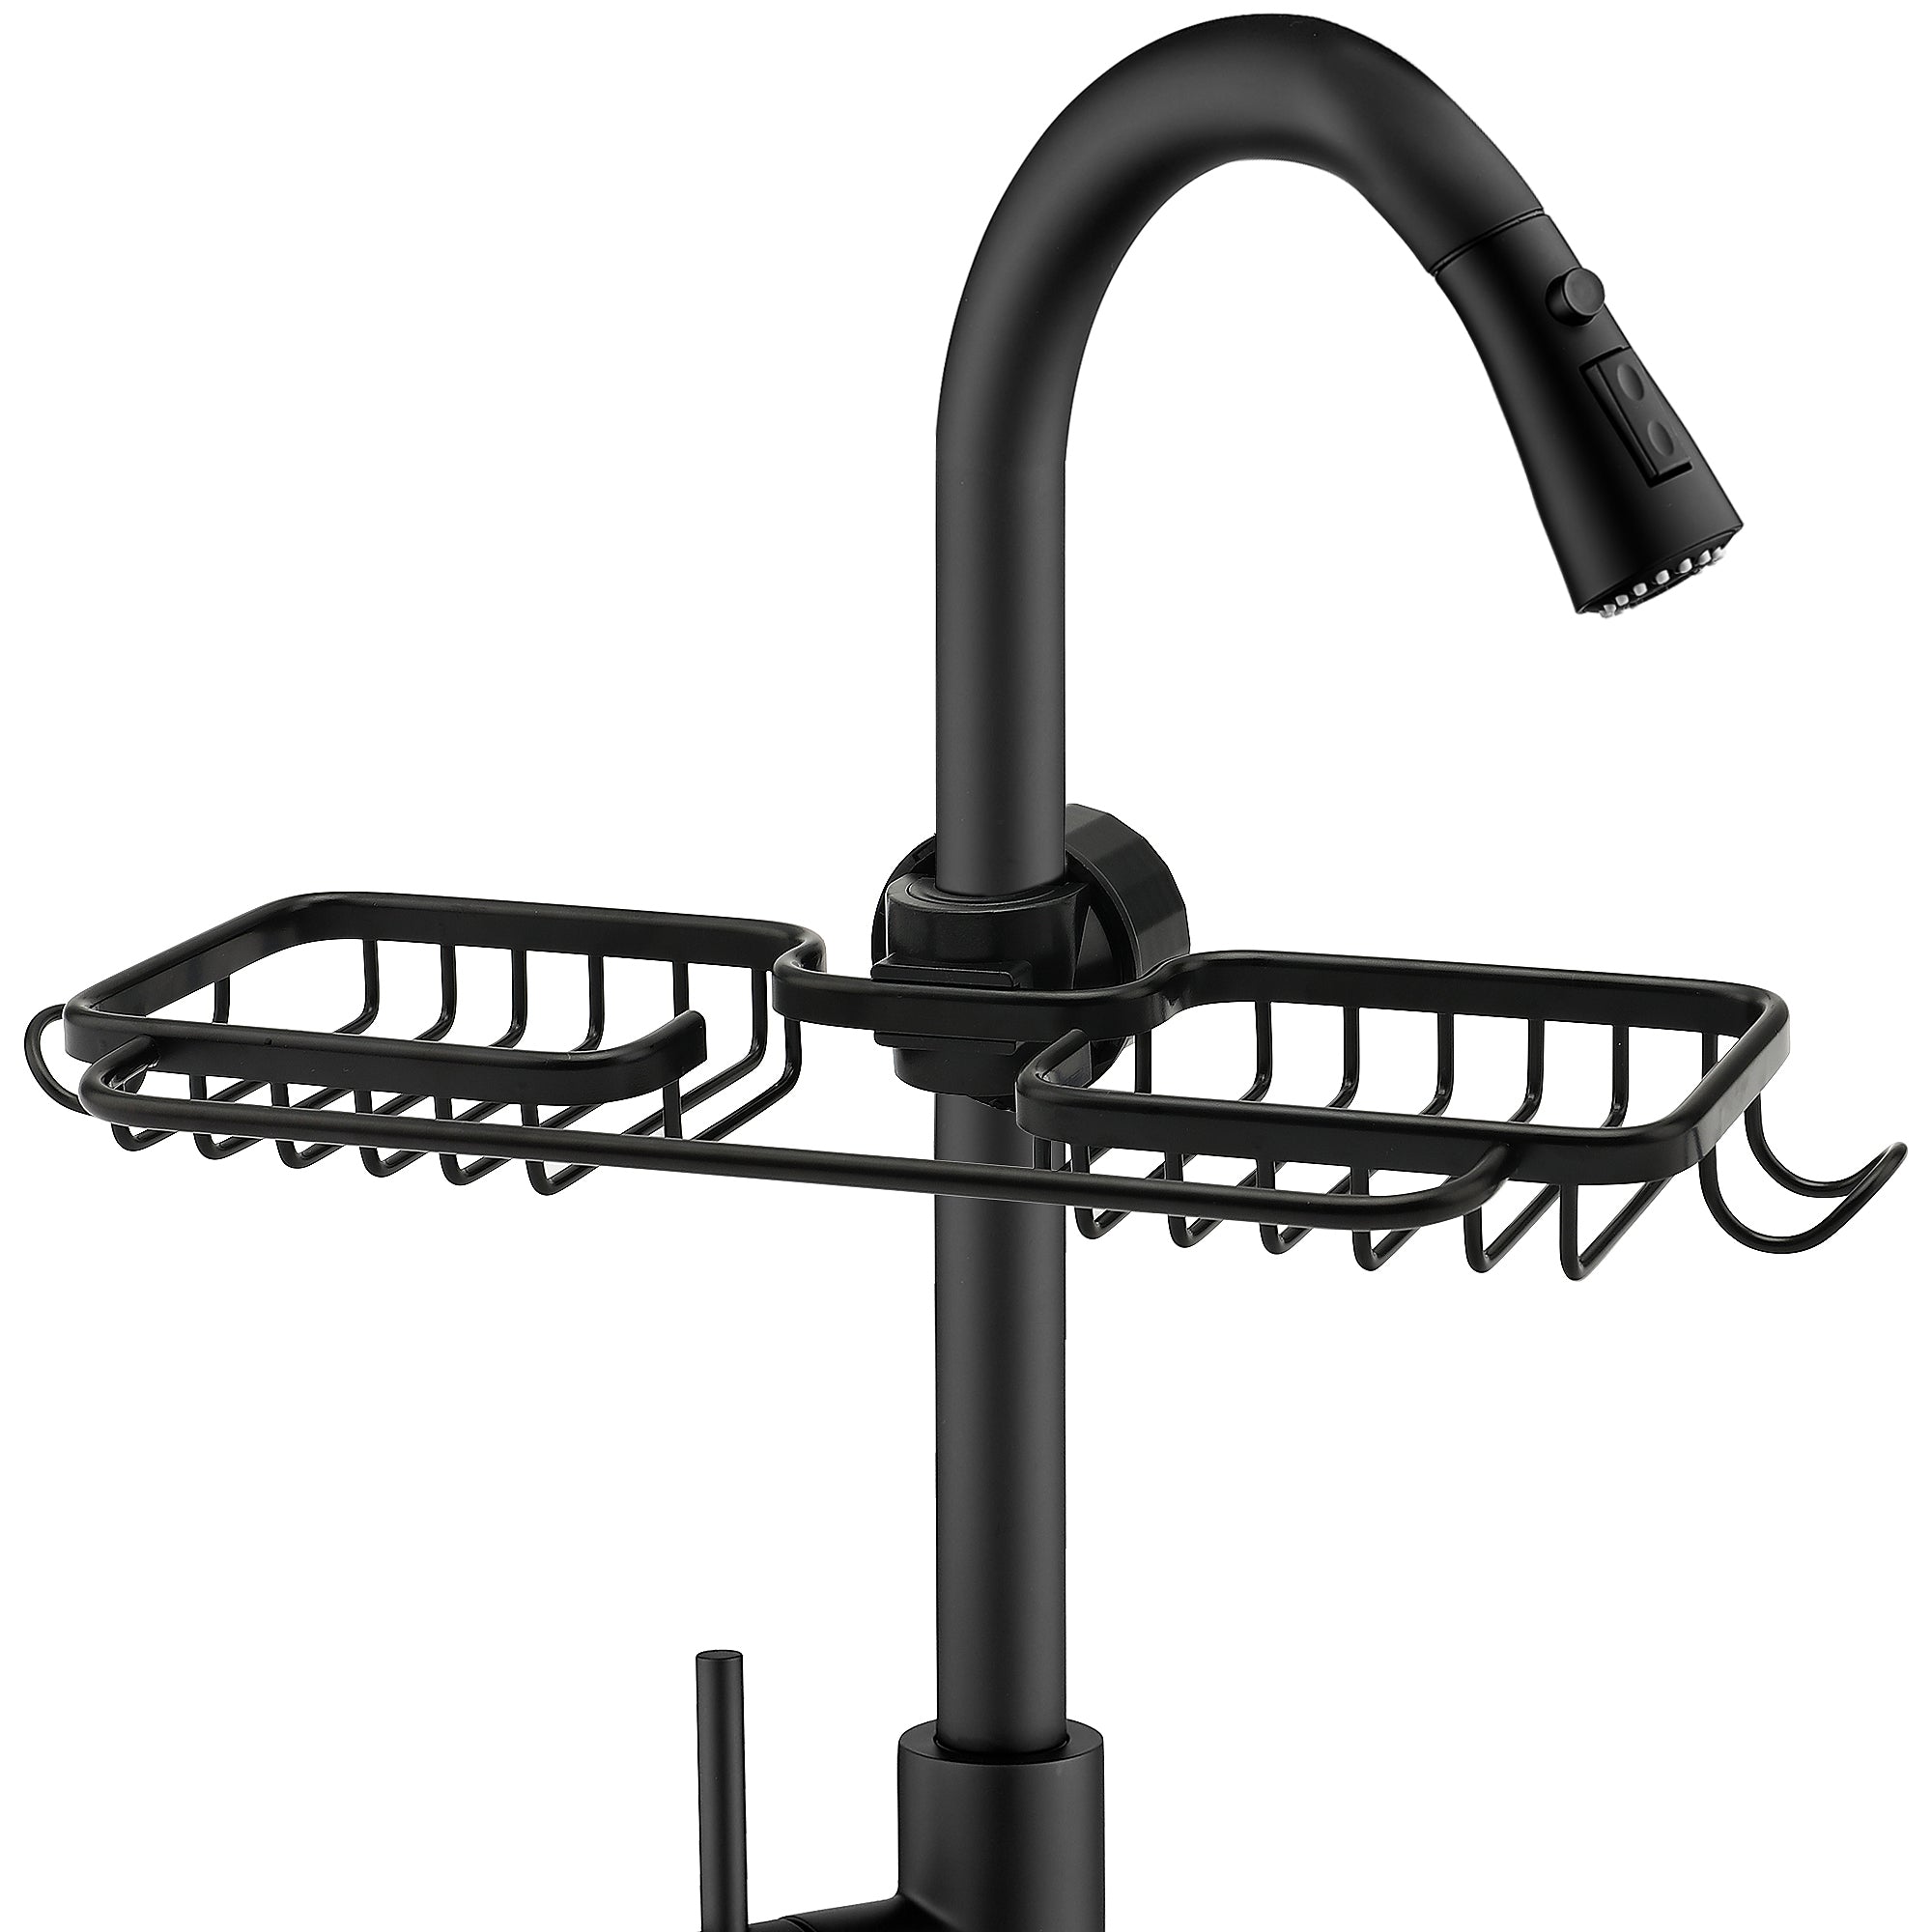  WINGSIGHT Faucet Sponge Holder Upgraded Kitchen Sink Caddy  Organizer with Dish Towels Drying Rack & Hooks Over Faucet Hanging Faucet  Drain Rack for Sink Organizer (Double-with Towel Rack, Black)